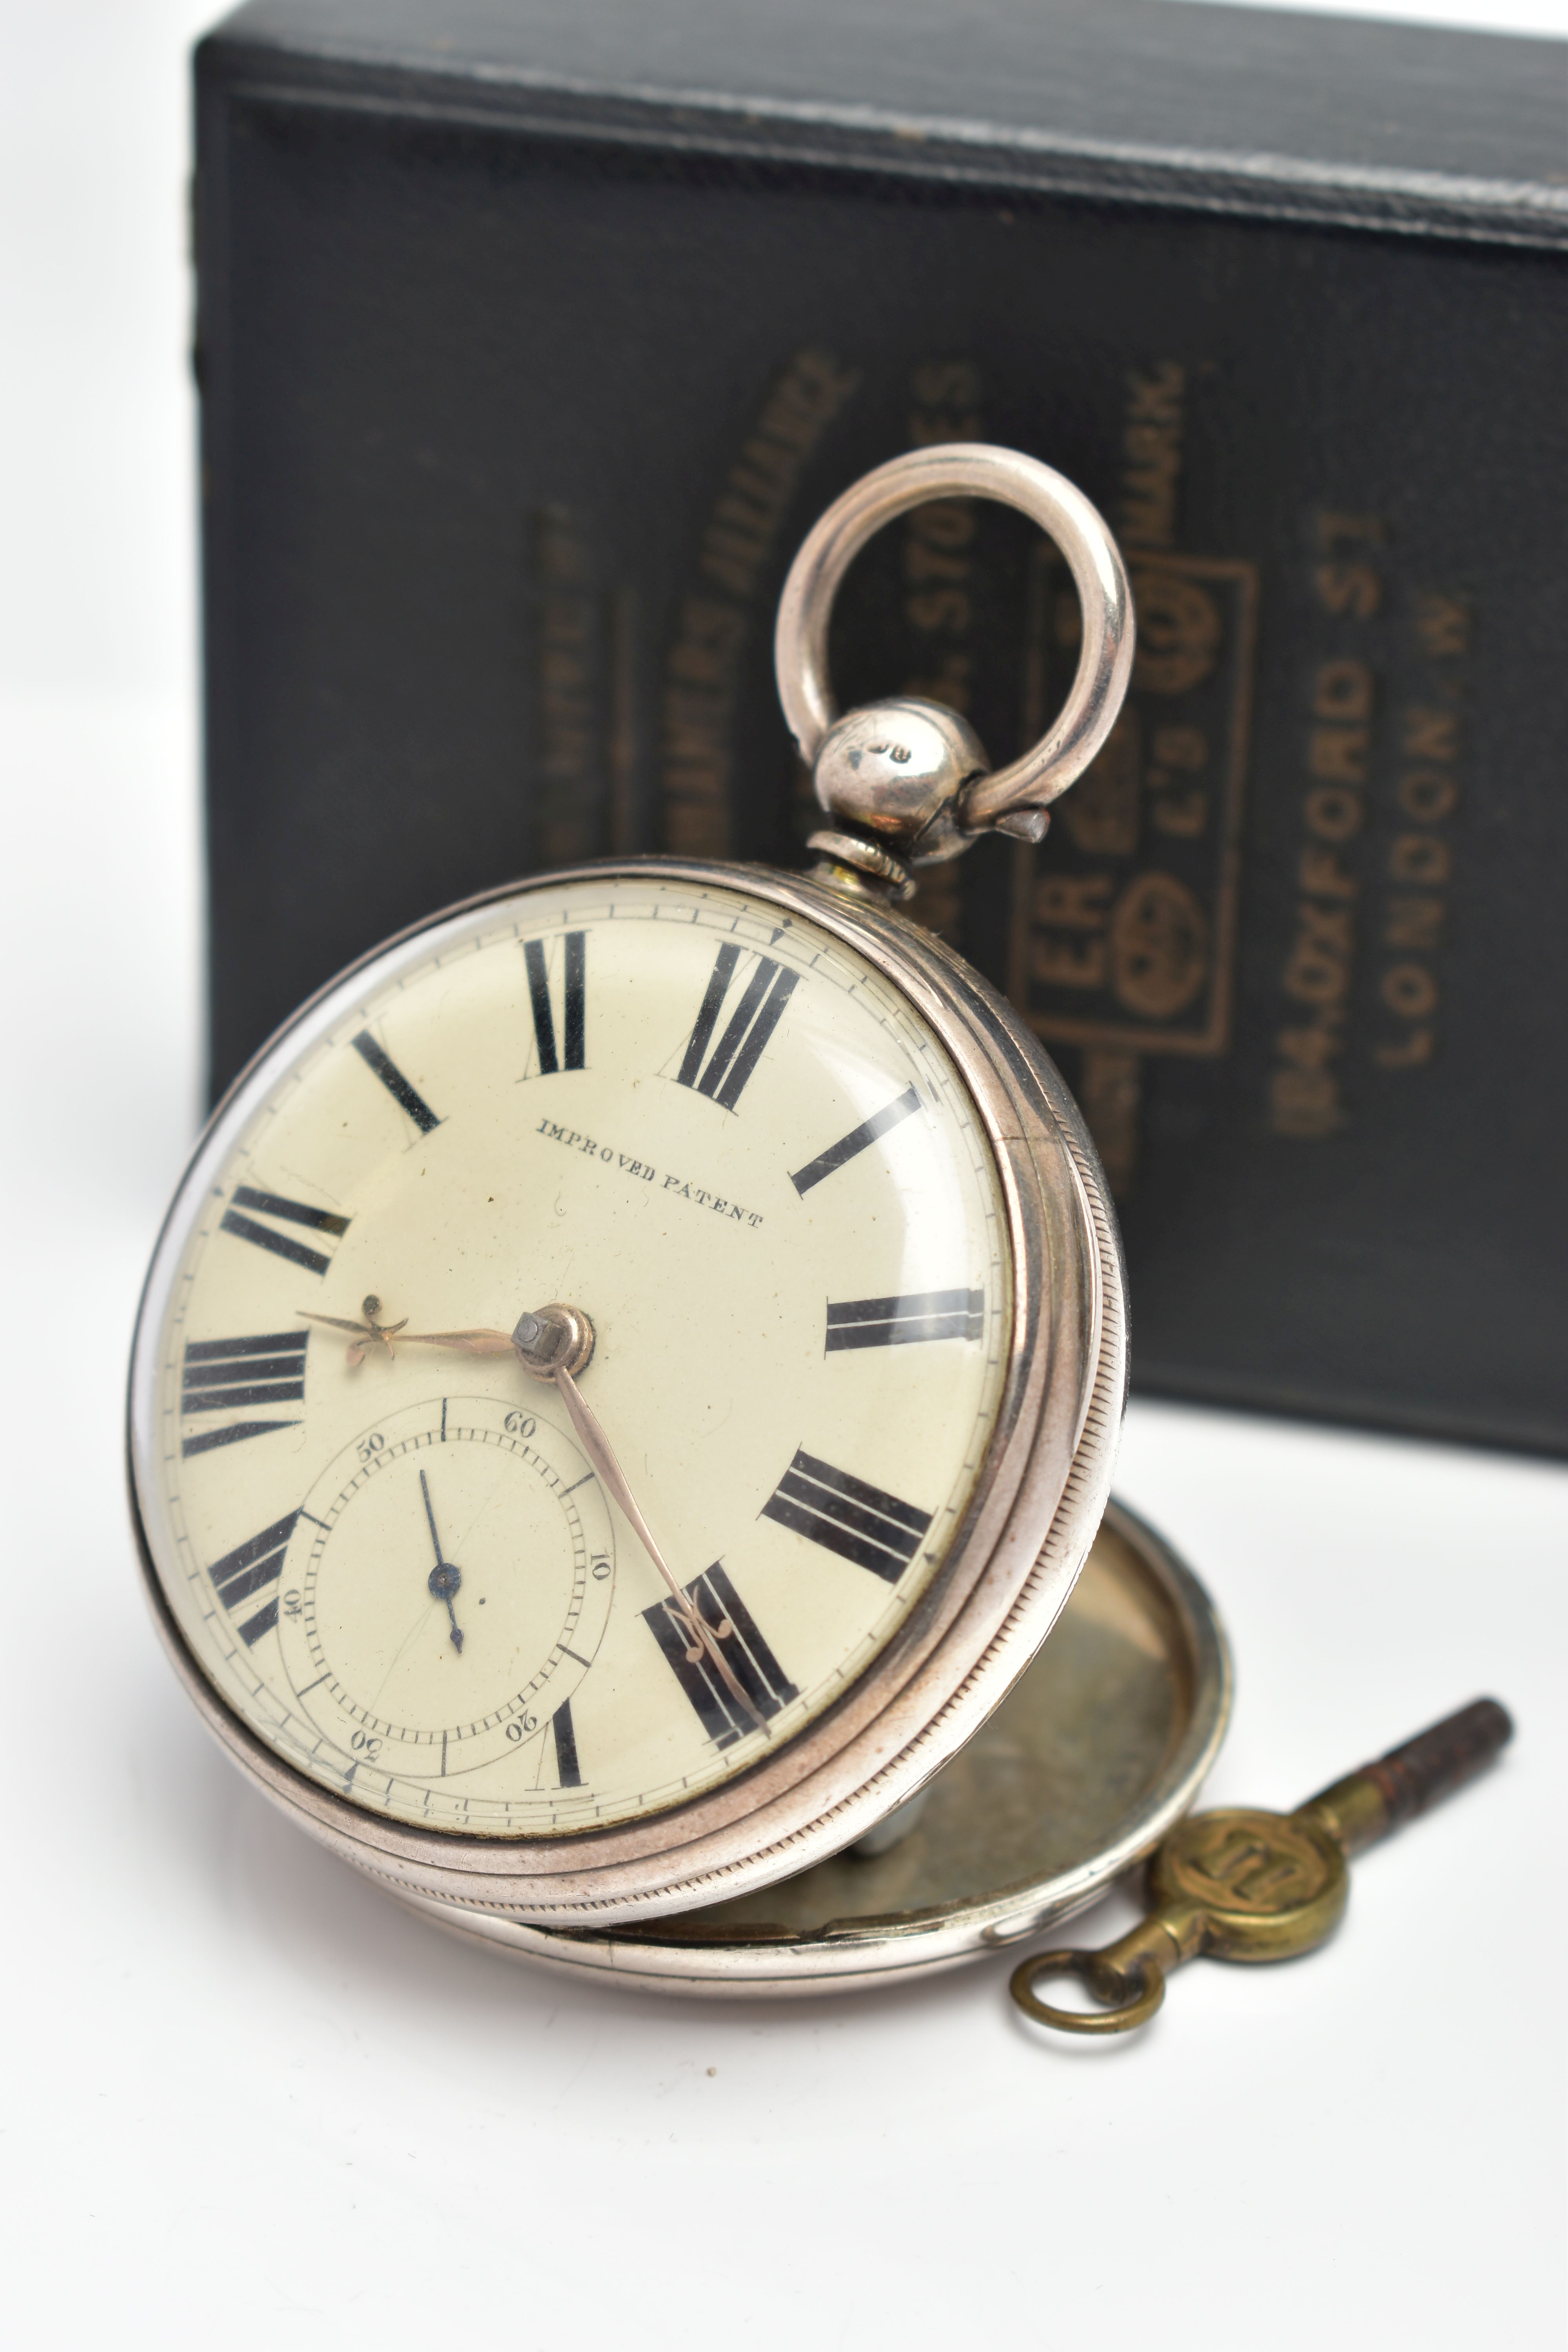 A CASED SILVER OPEN FACE POCKET WATCH, key wound, round cream dial signed 'Improved Patent', large - Image 2 of 8